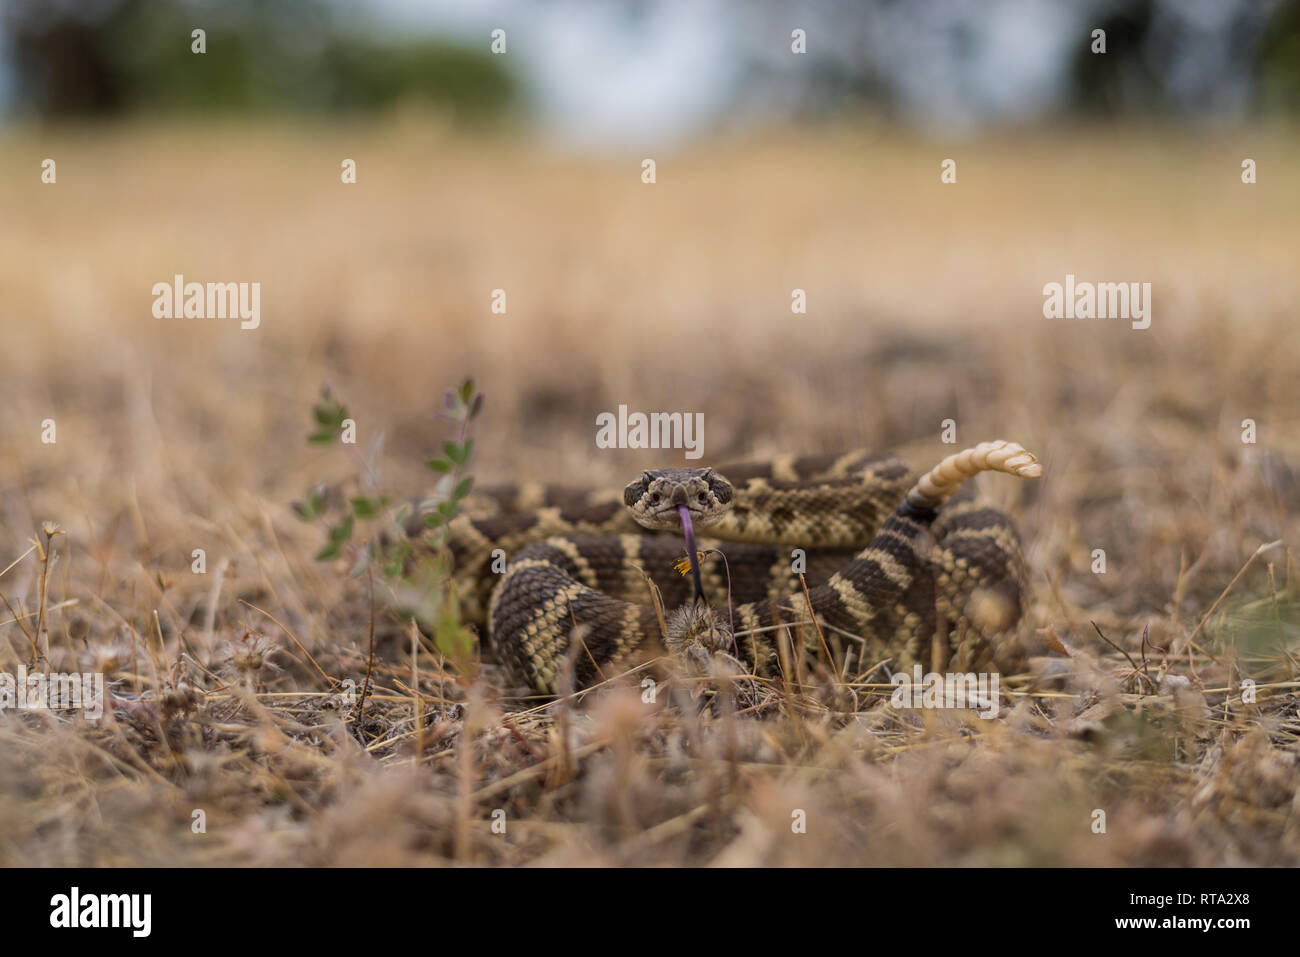 A Northern Pacific Rattlesnake investigating the photographer, on a warm and cloudy afternoon in northern California. Stock Photo